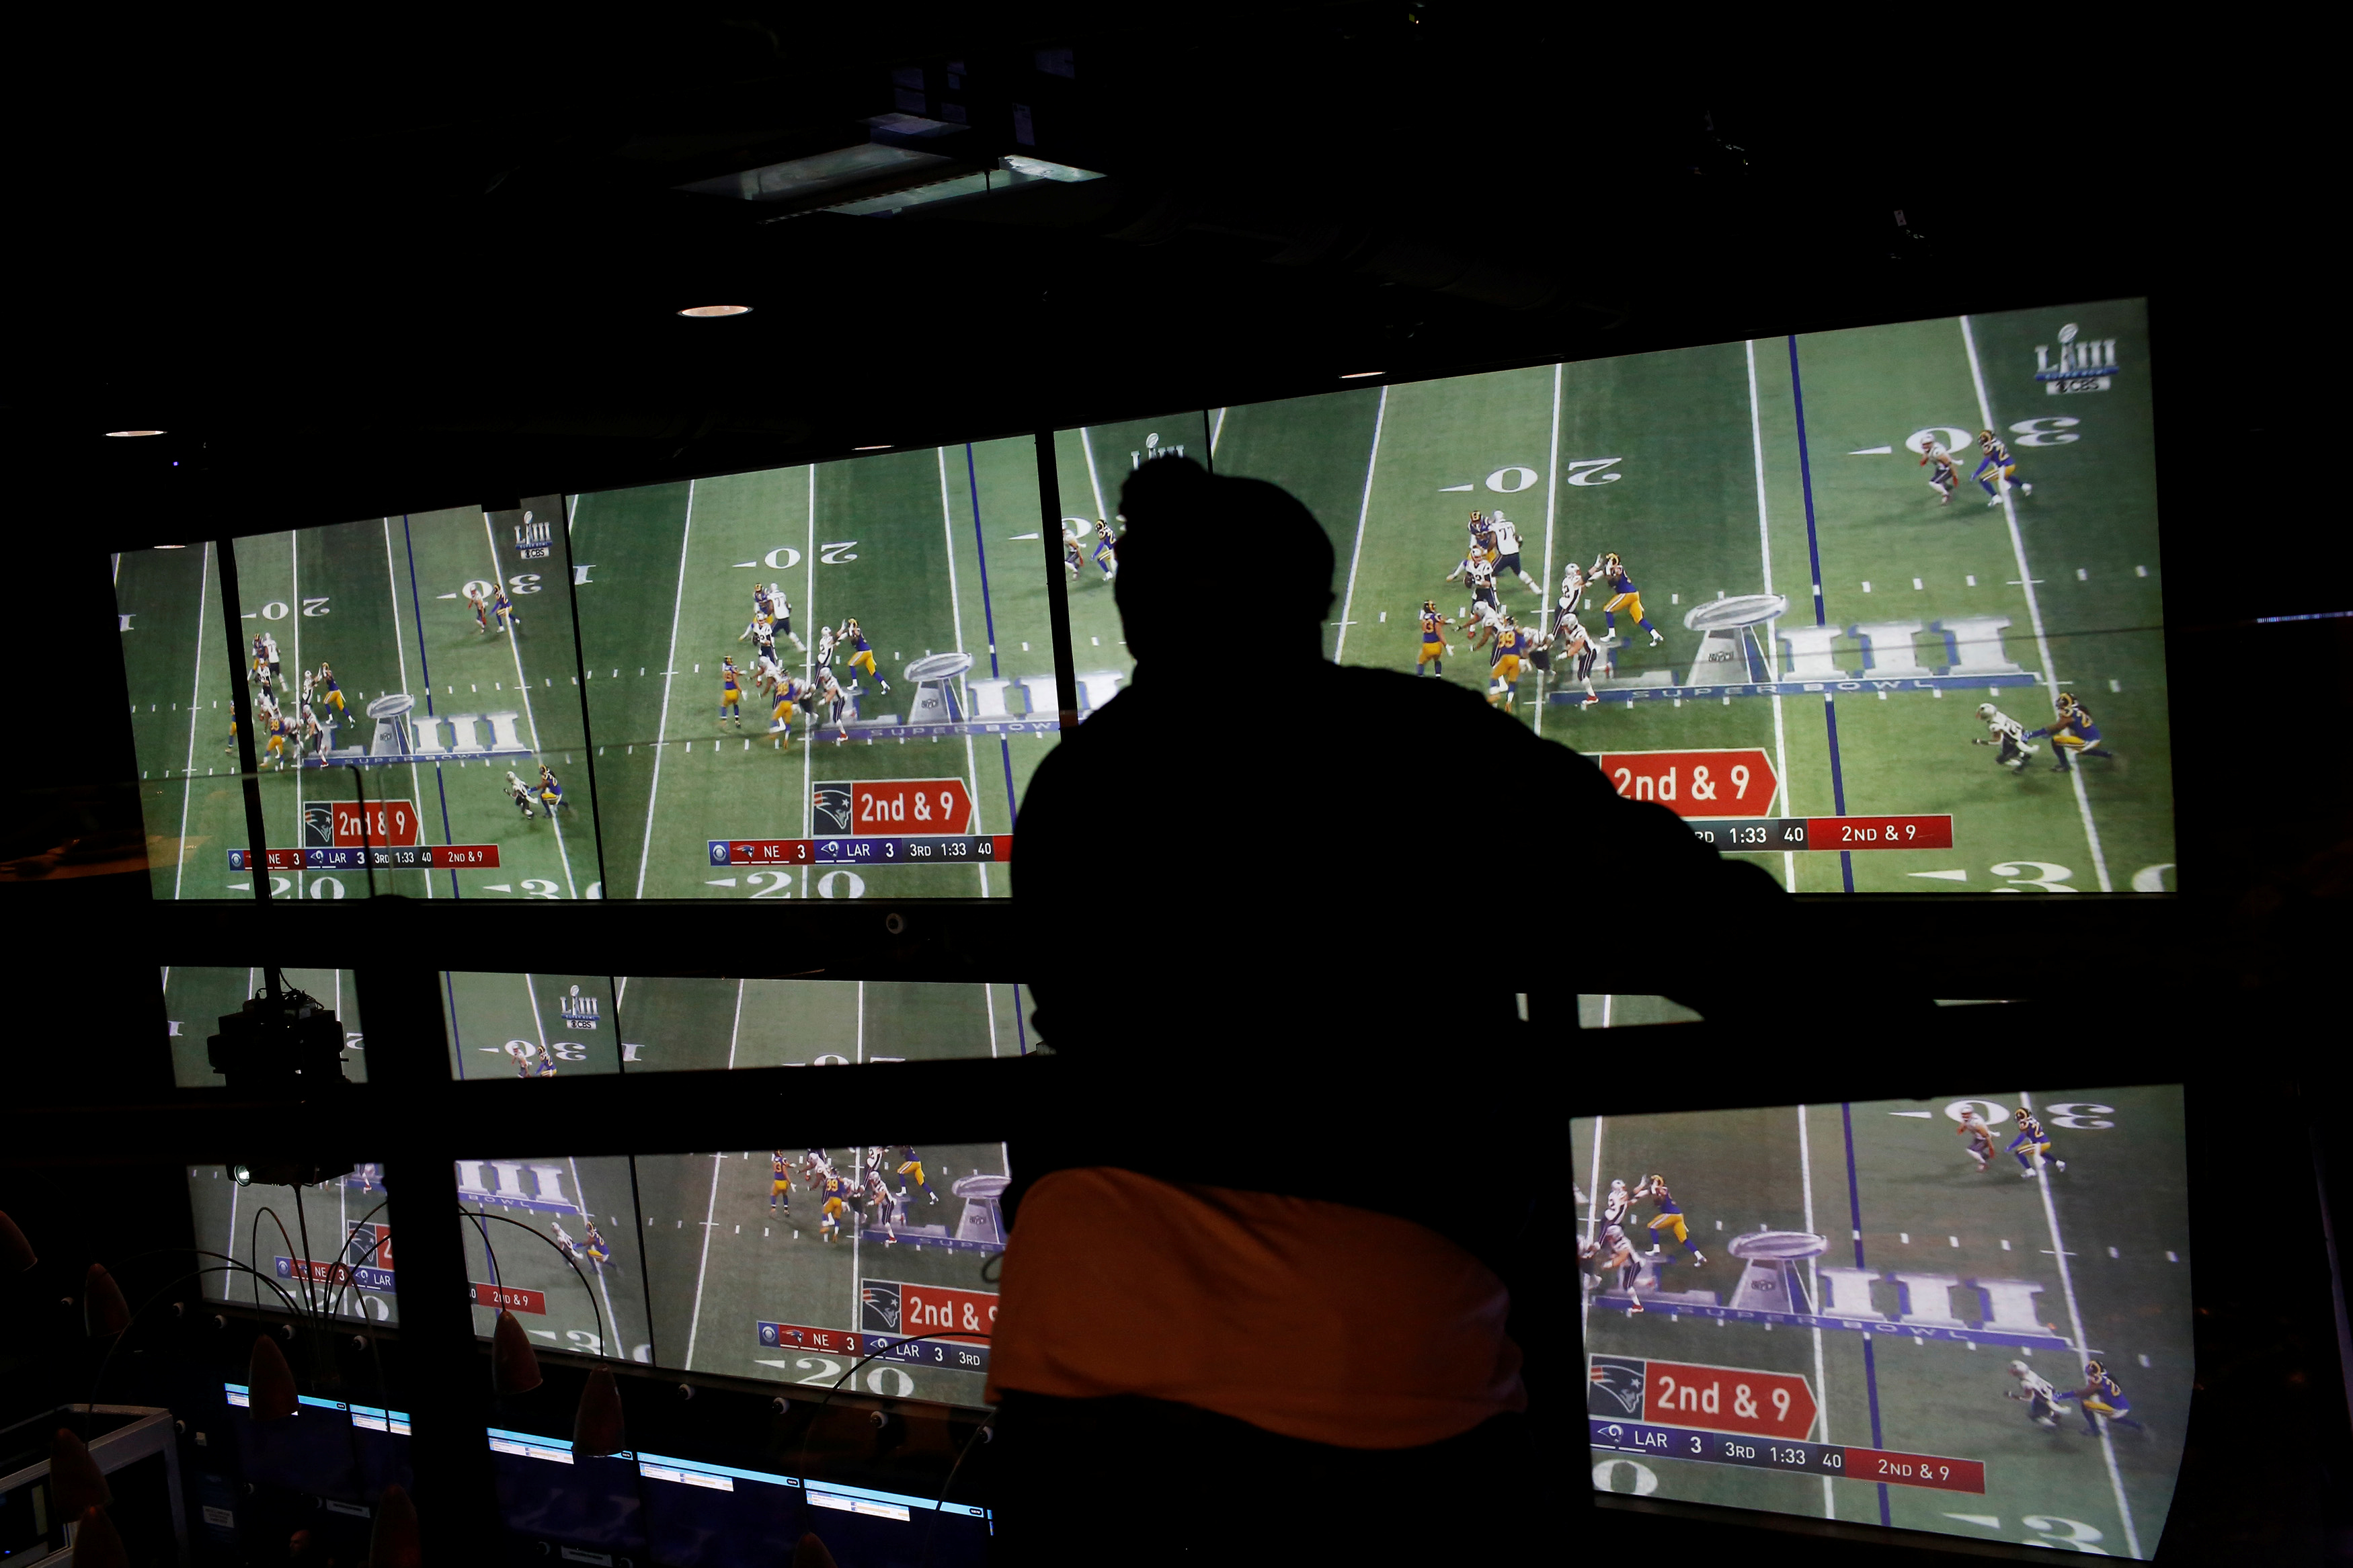 A man watches the game after betting at the FANDUEL sportsbook during the Super Bowl LIII in East Rutherford, New Jersey , U.S., February 3, 2019.